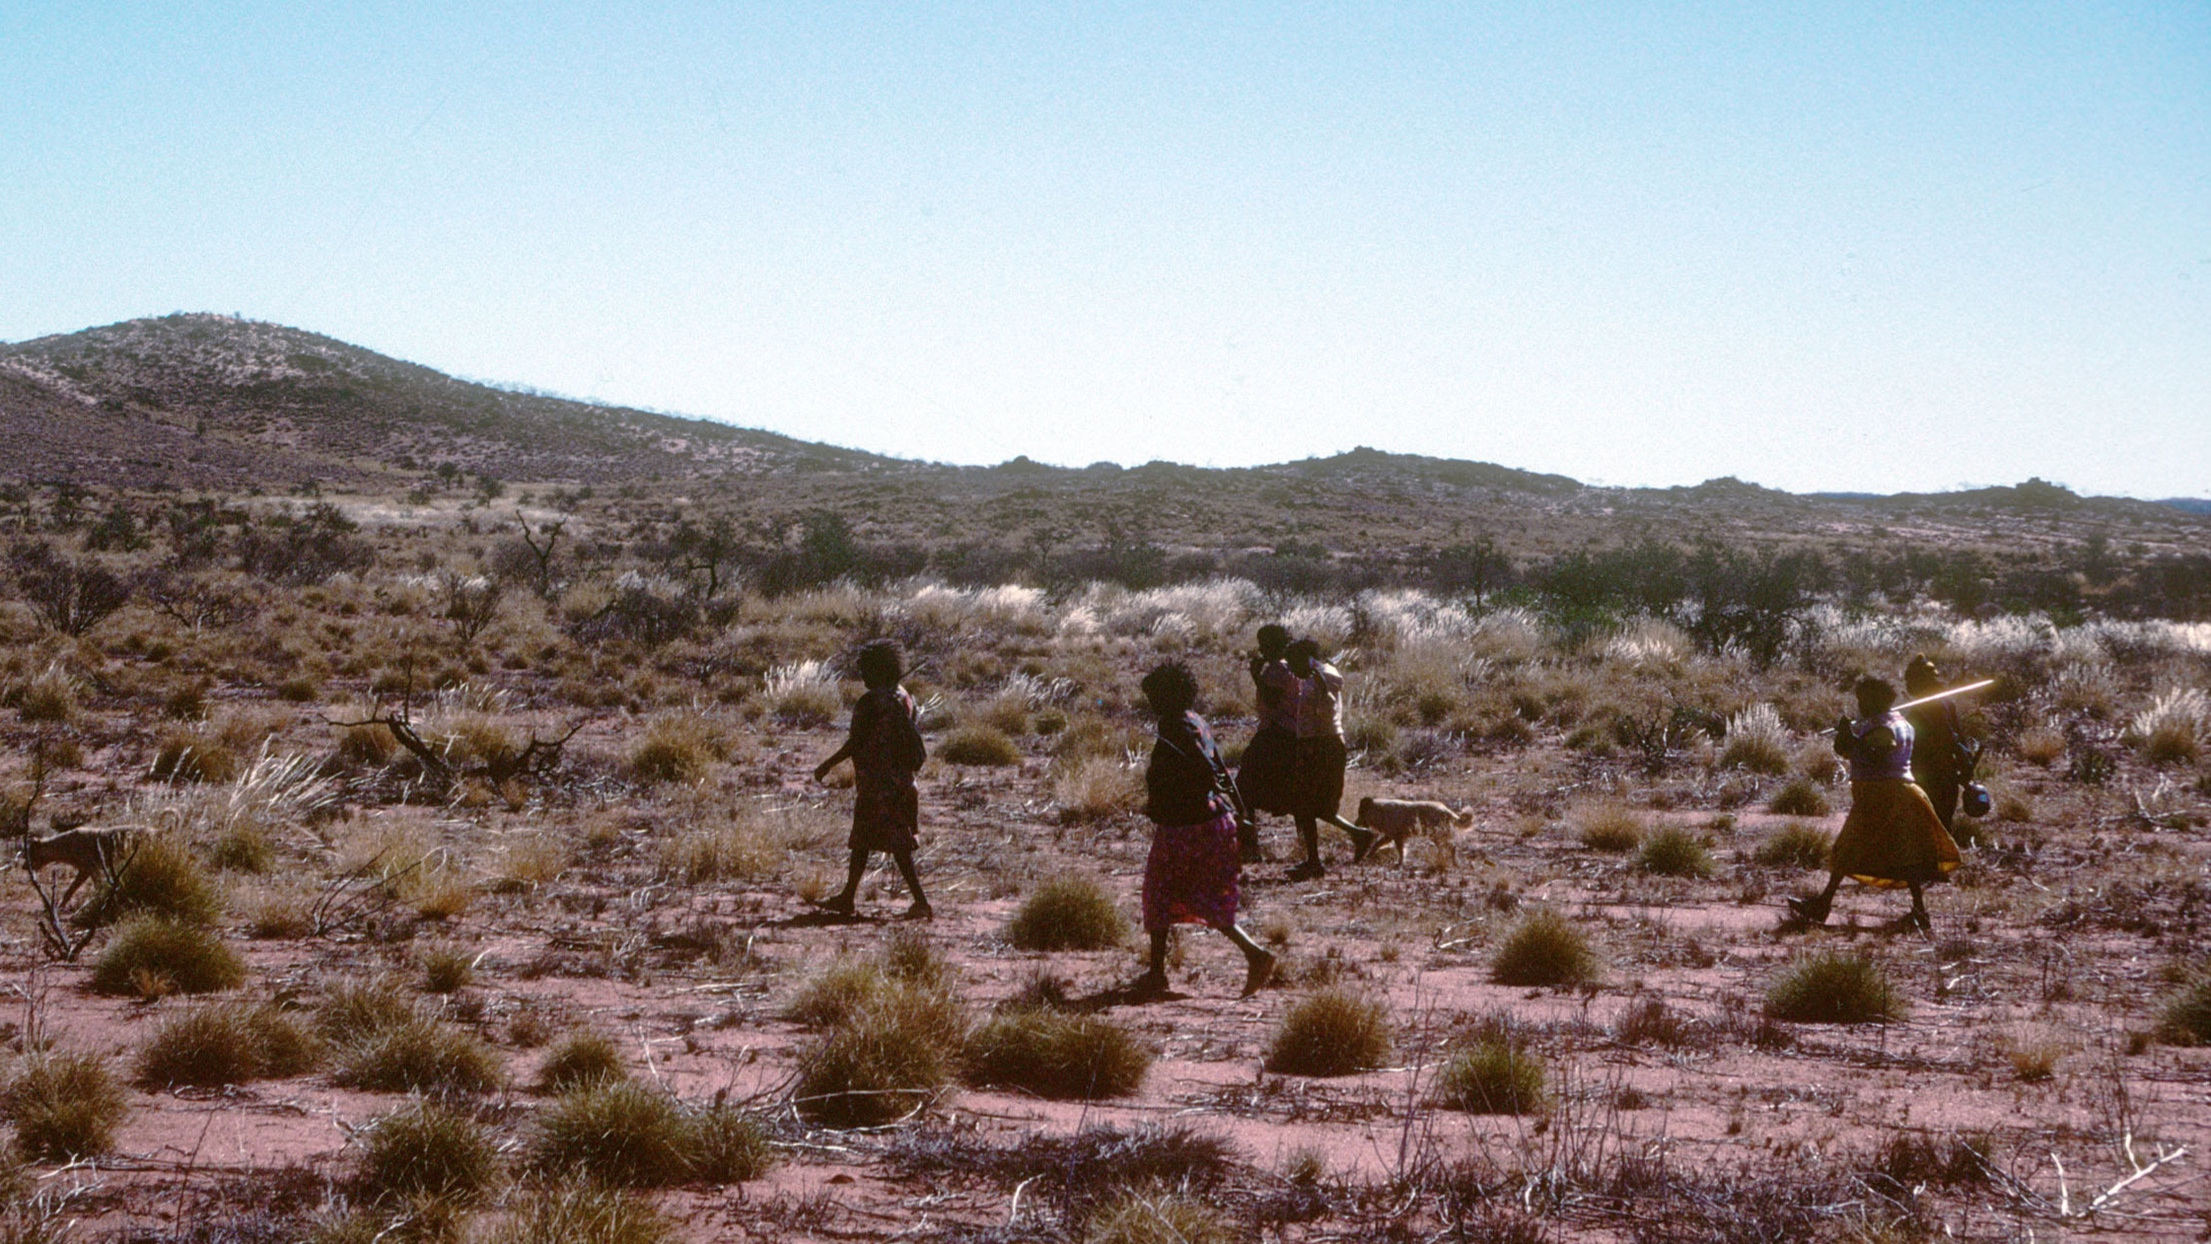 1988 Martu women head out from Parnngurr for a day's hunting on foot. Fiona walked with them each day for months.